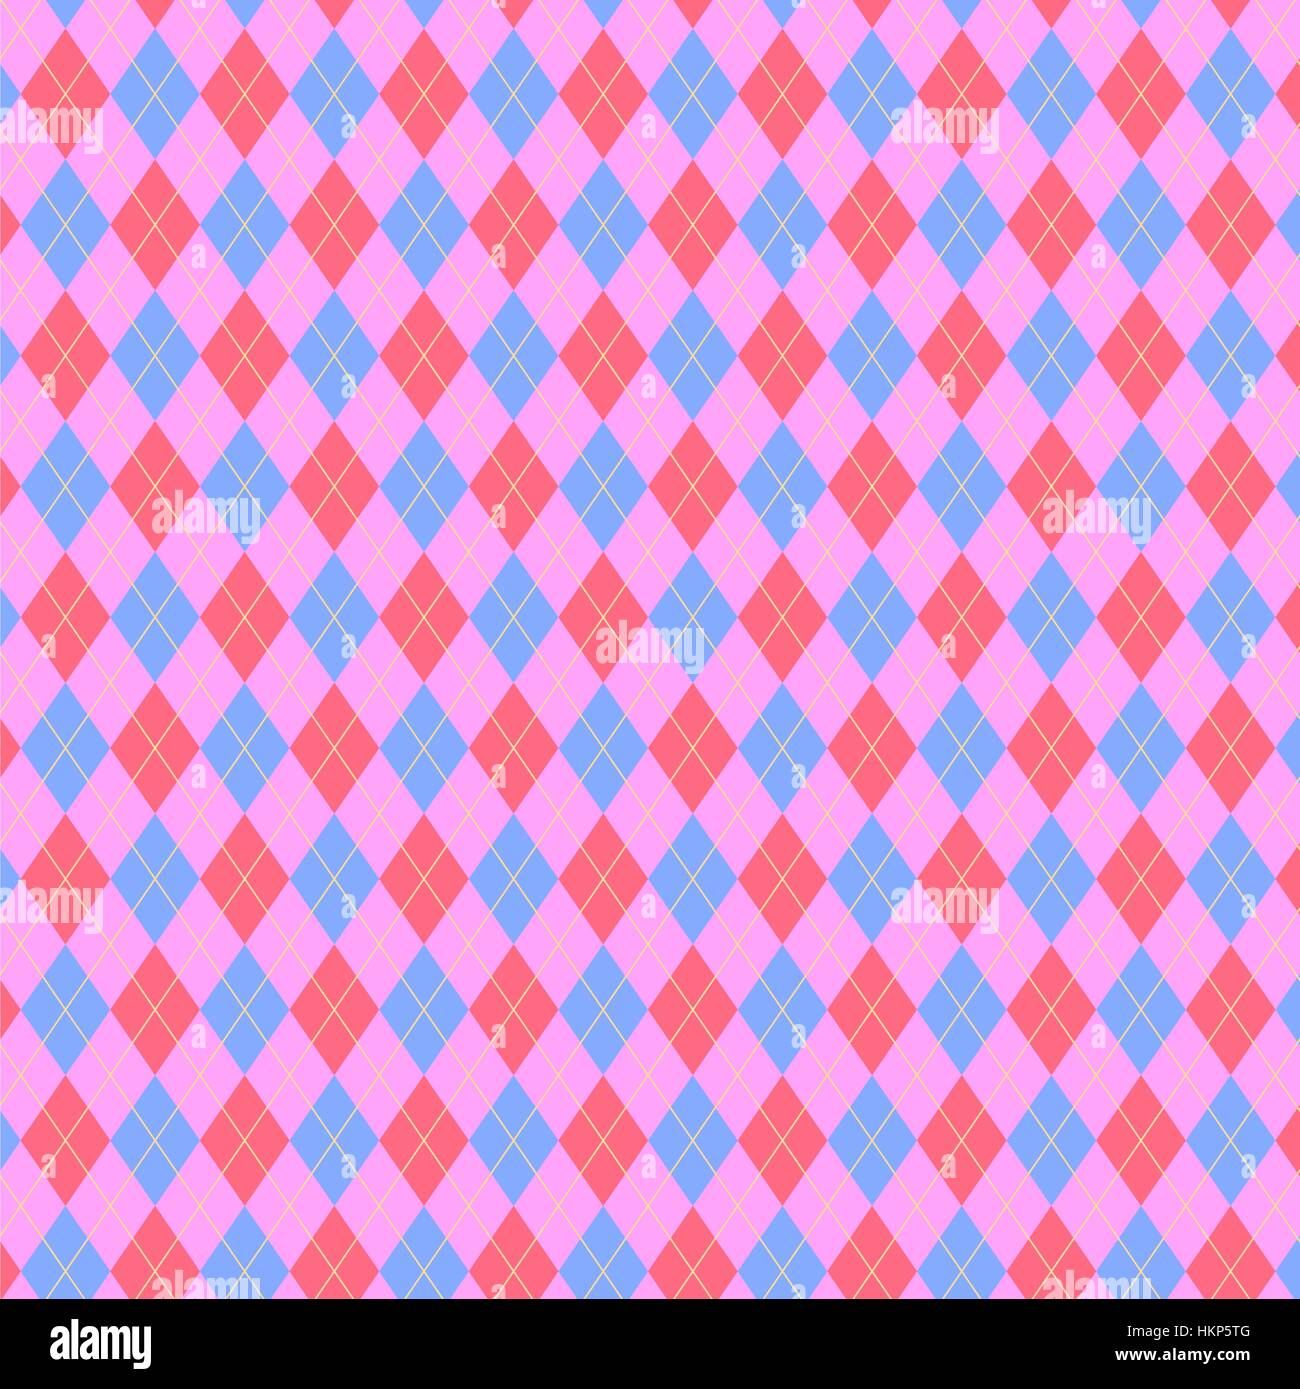 Argyle pattern in pink color scheme. Sweater texture Stock Vector